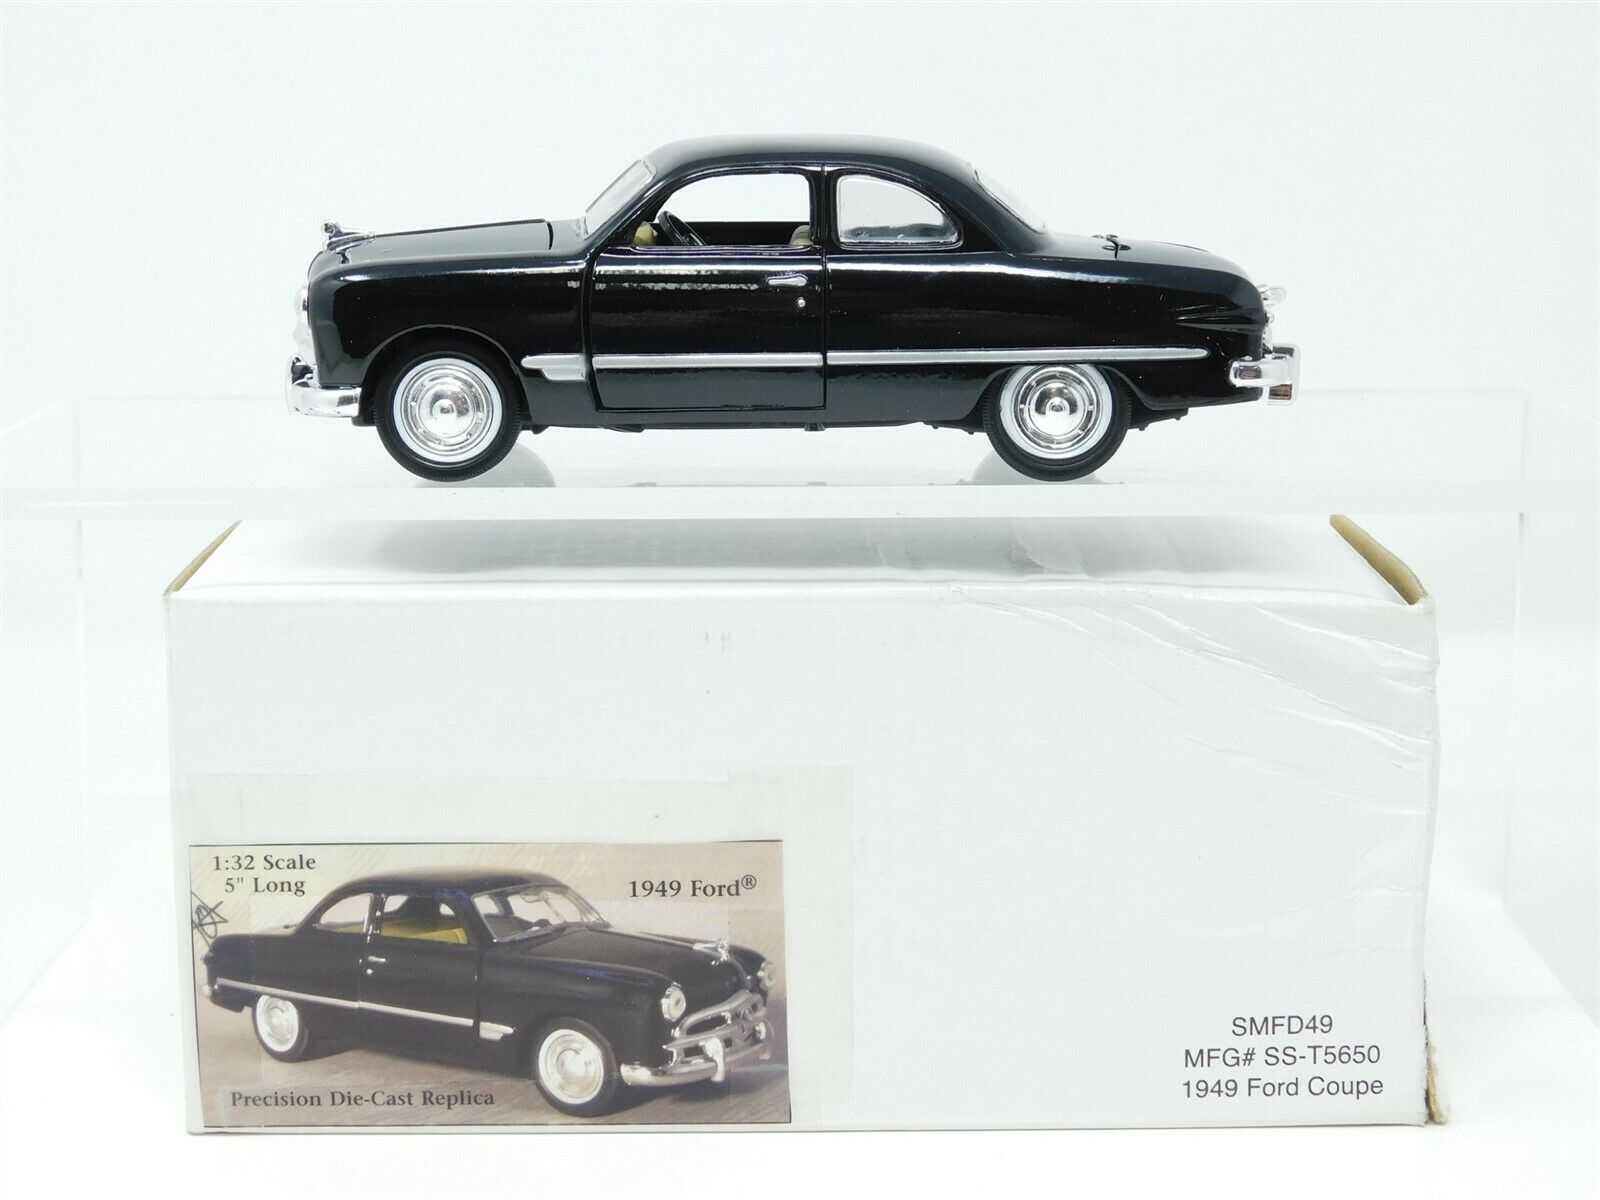 1:32 Scale National Motor Museum Ss-t5650 1949 Ford Coupe - Black